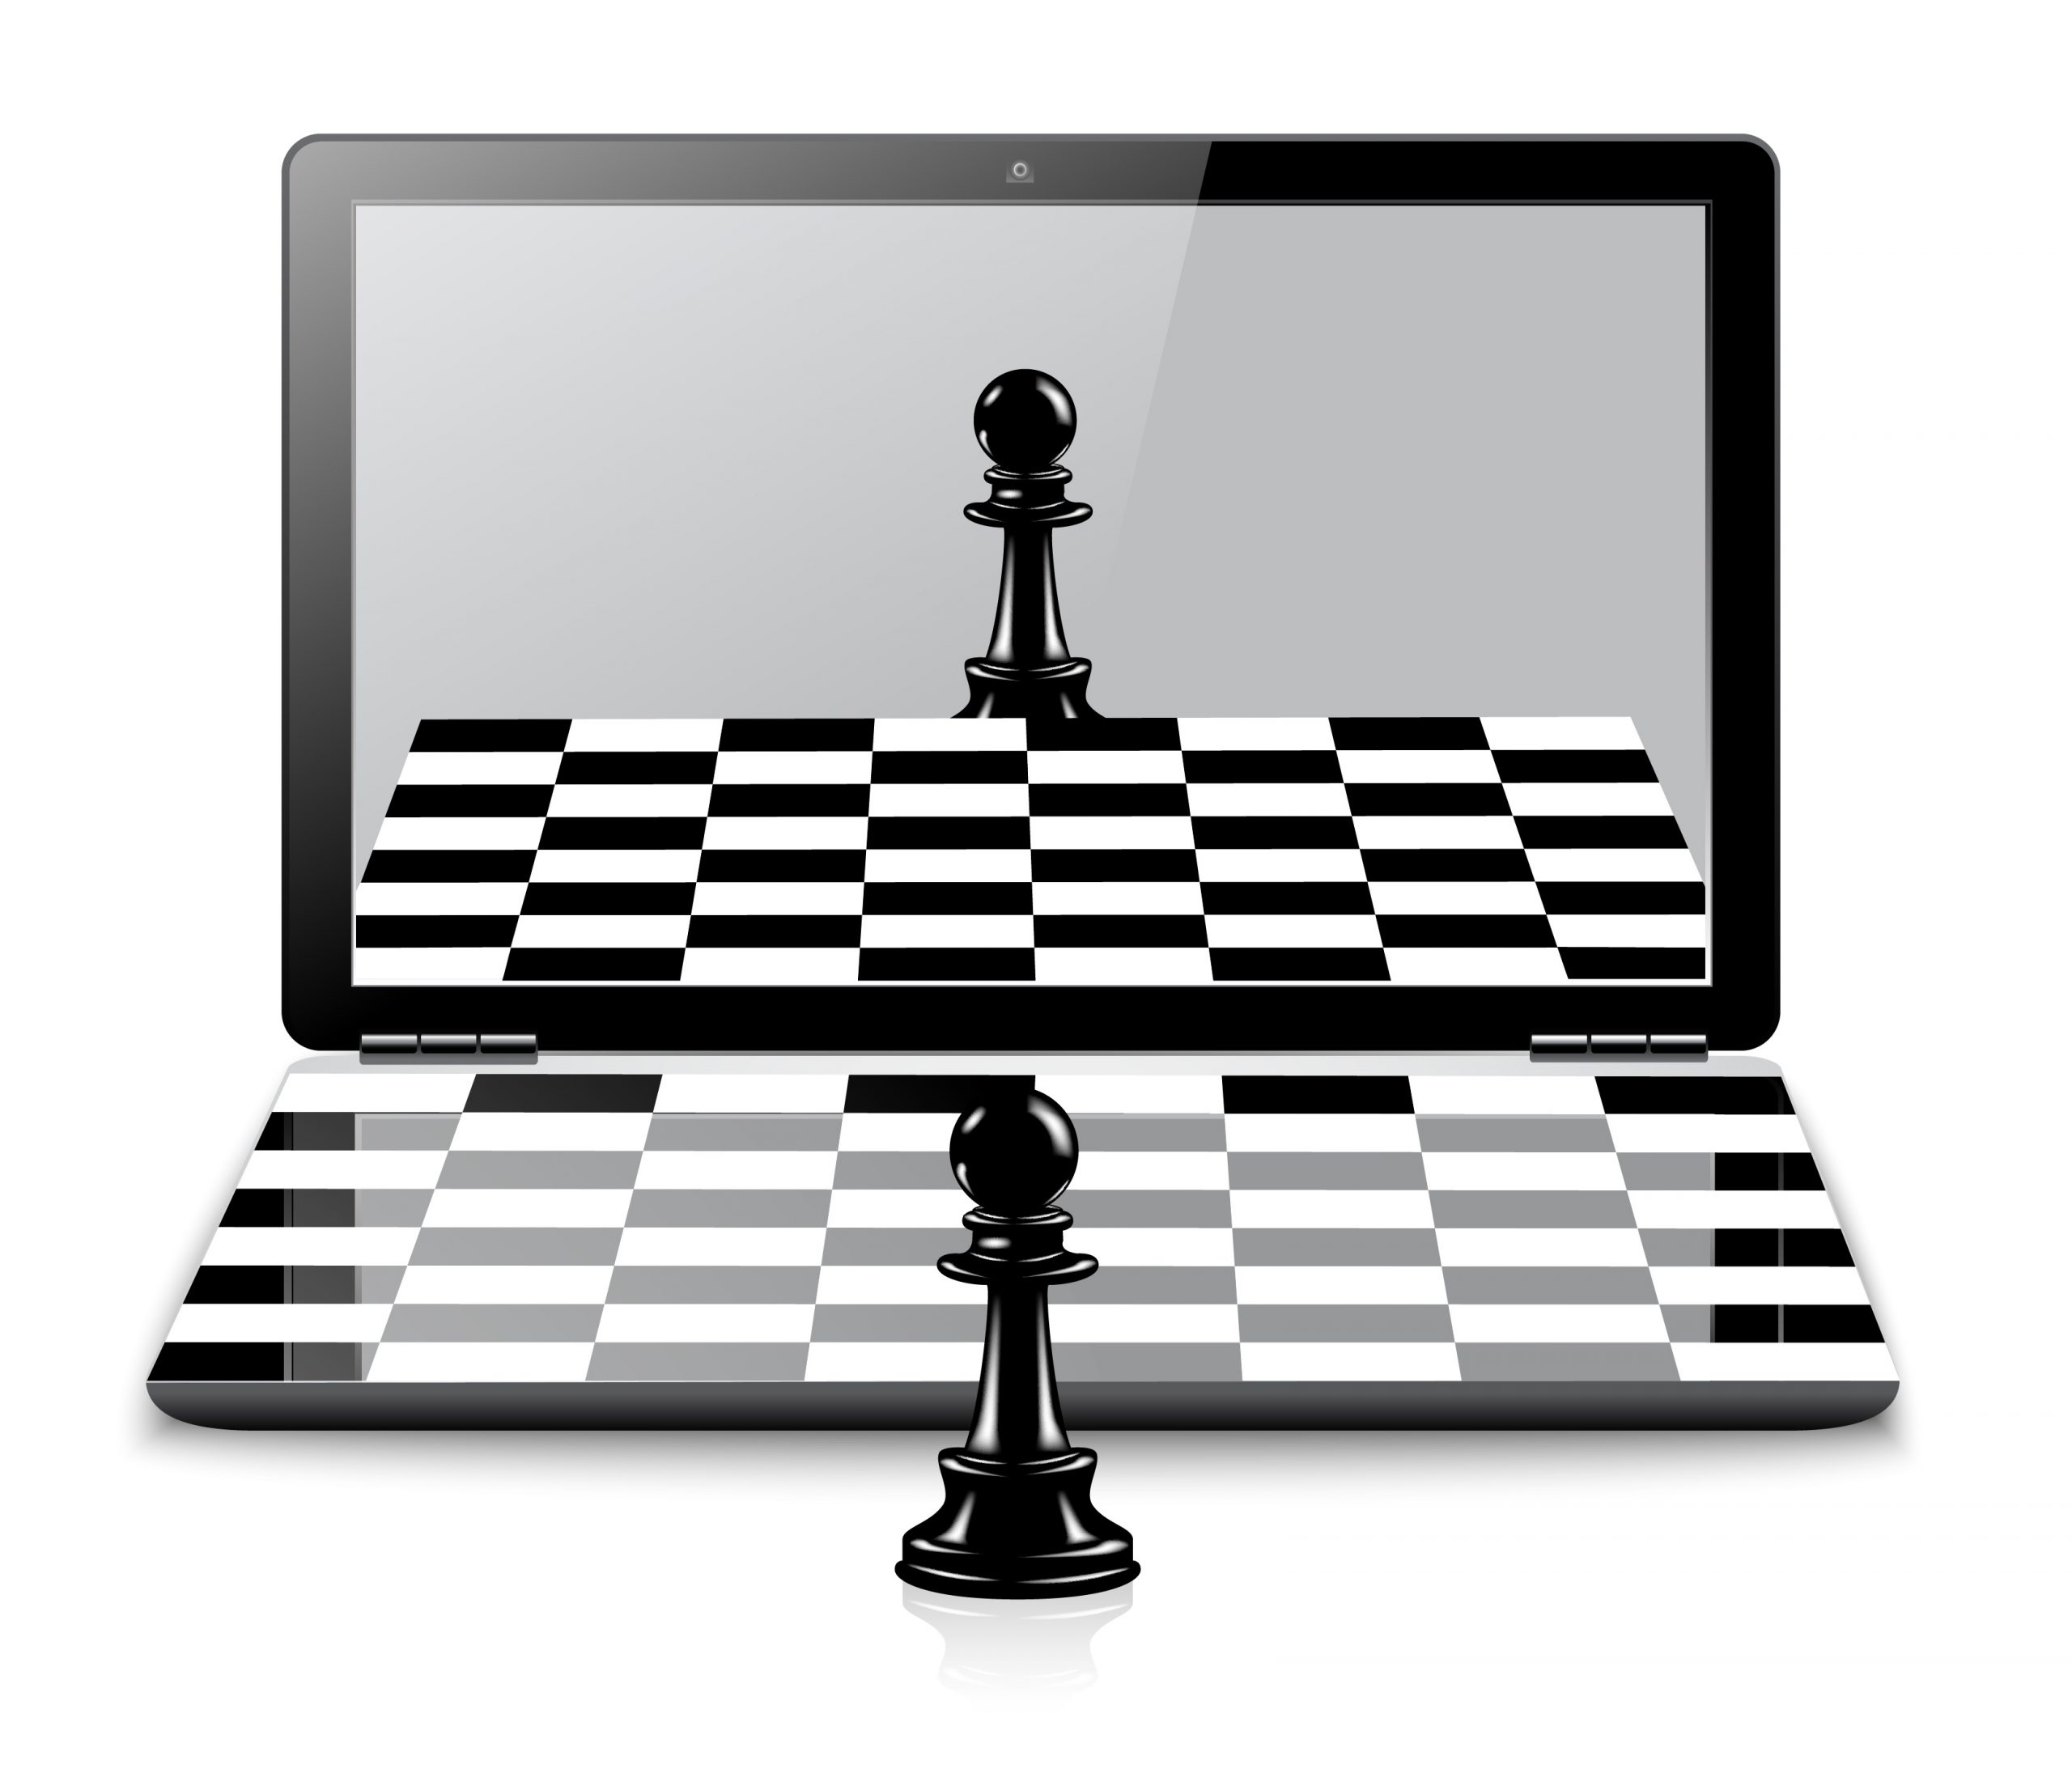 Play Chess Online With Zoho Writer - Zoho Blog